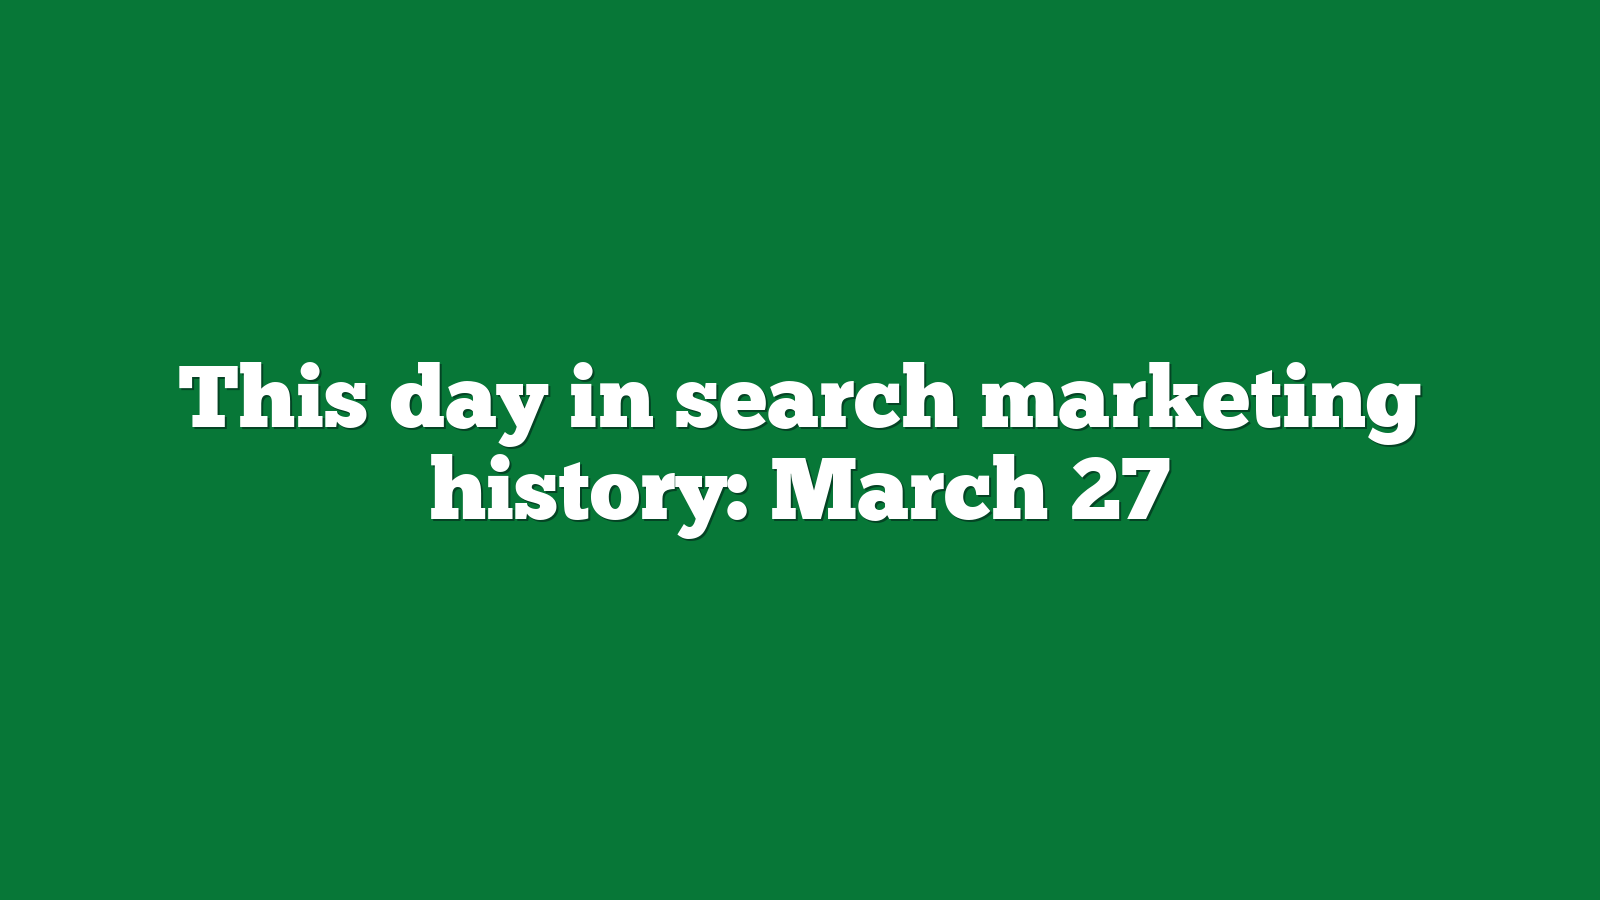 This day in search marketing history March 27